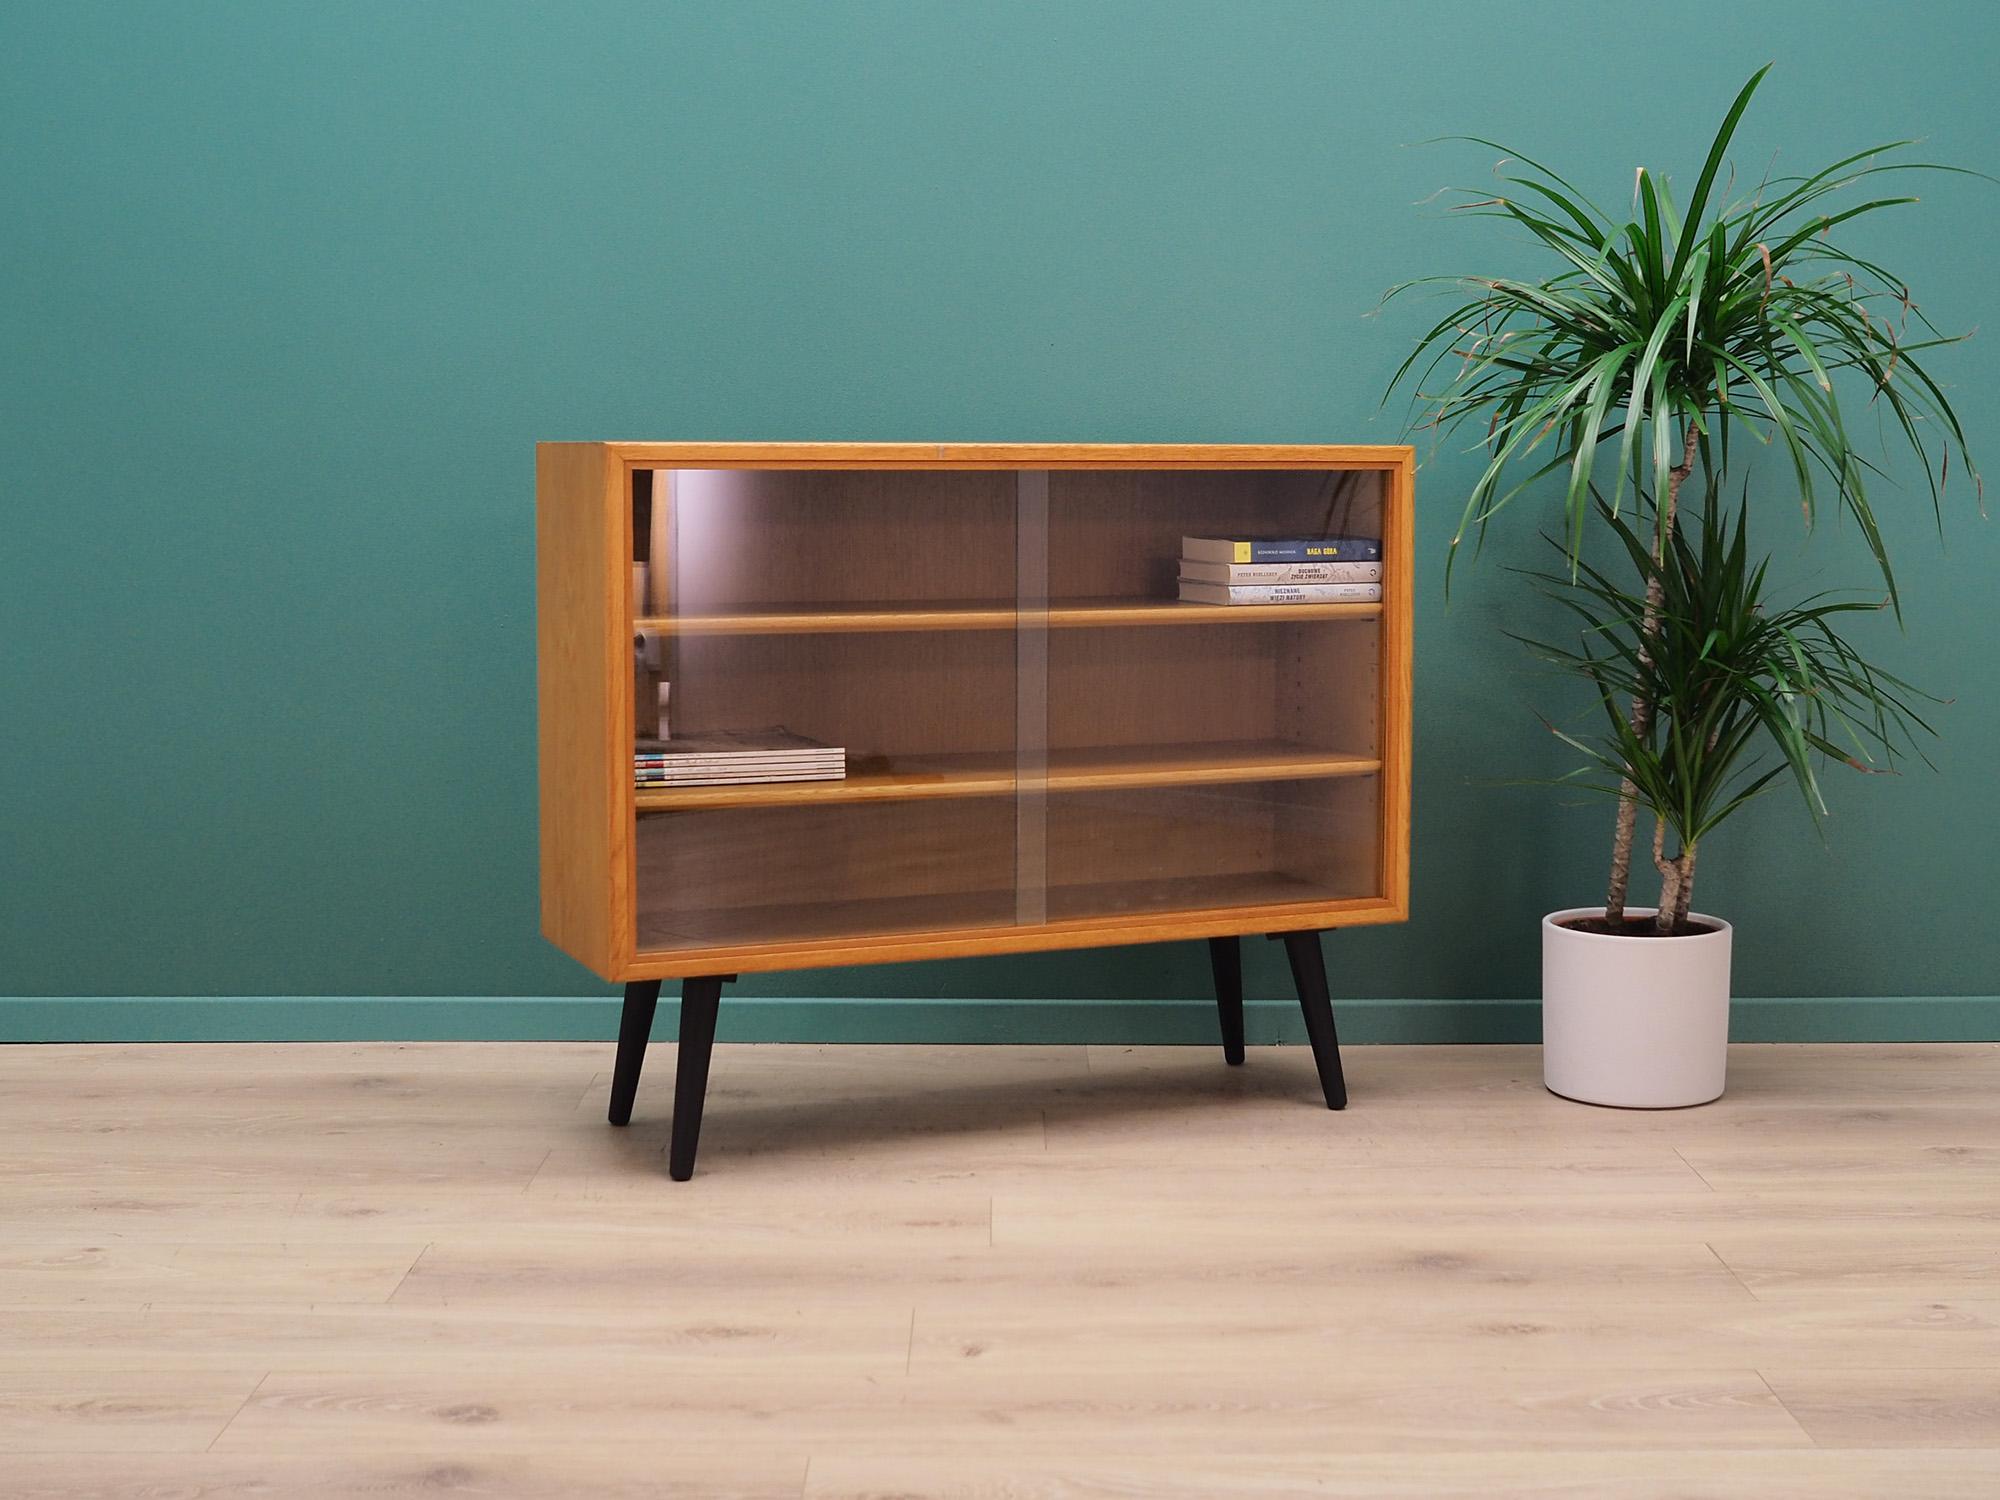 Superb bookcase form the 1960s-1970s. Danish design, Minimalist form. Furniture is covered with ash veneer, legs are made of solid ashwood. Manufactured in Søborg Møbler manufactory. Bookcase has two adjustable shelves located behind a glass sliding